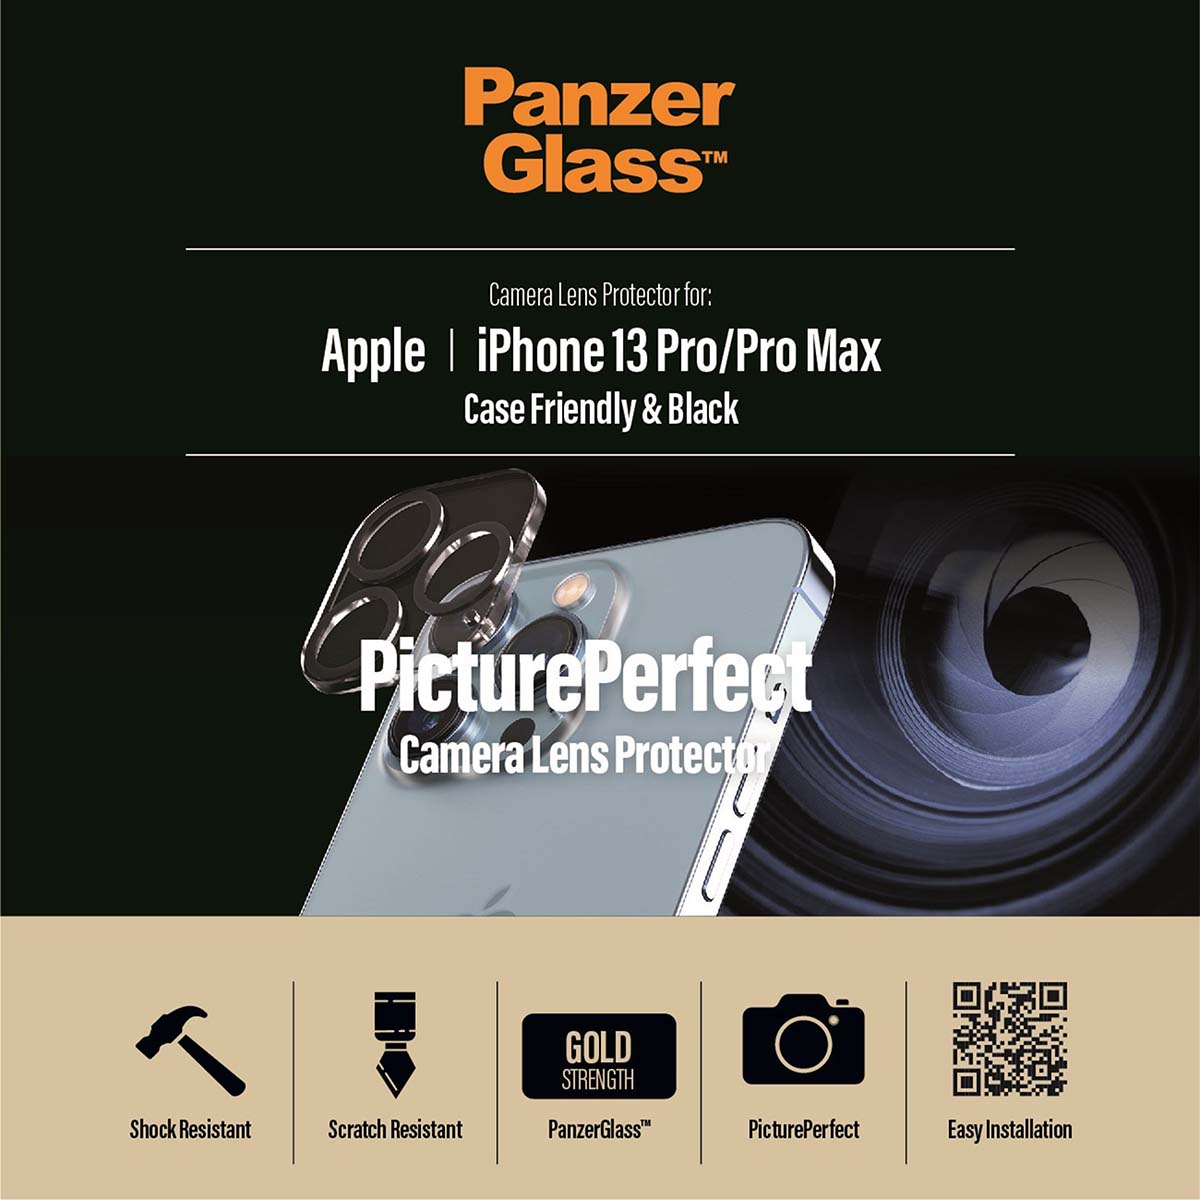 PanzerGlass PicturePerfct Lens Protector for iPhone 13Pro/Pro Max